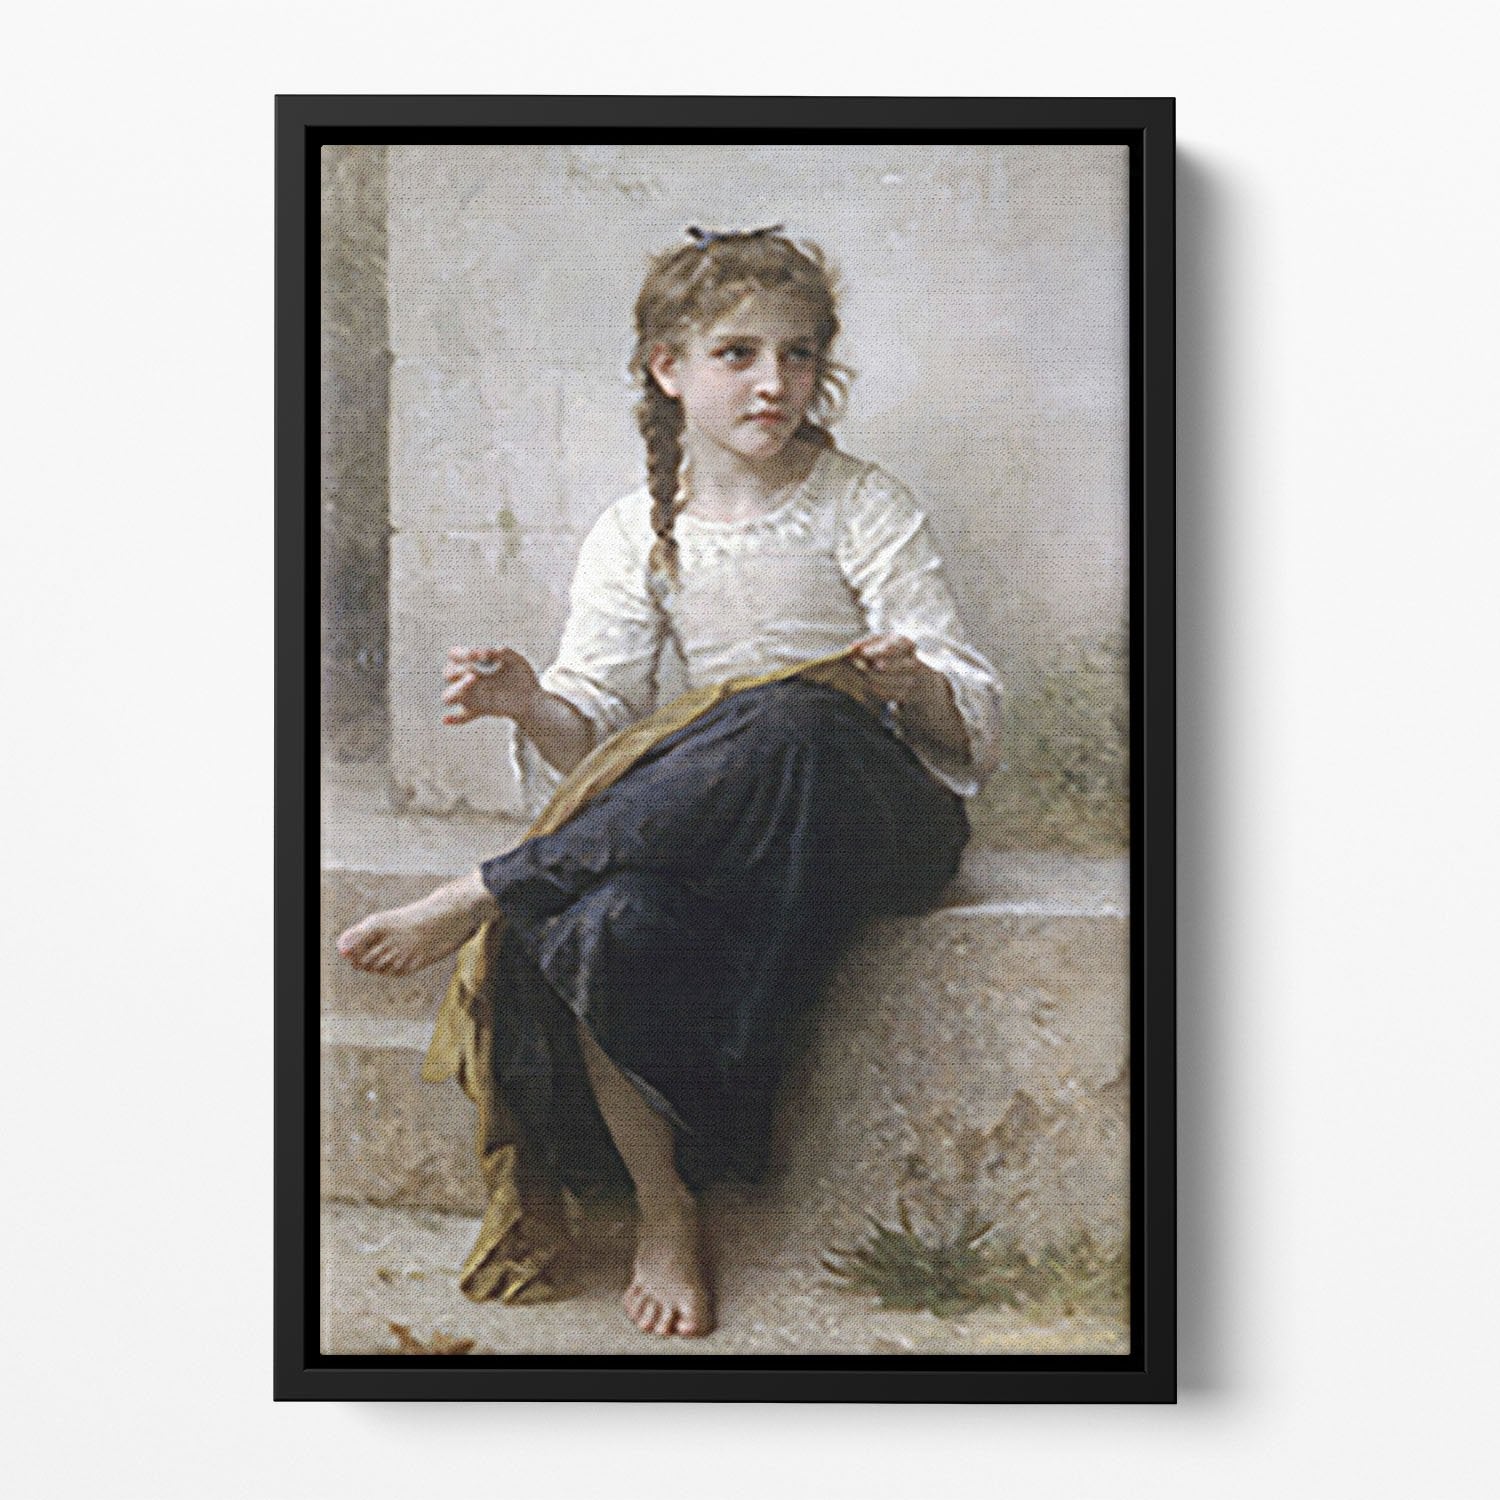 Sewing By Bouguereau Floating Framed Canvas